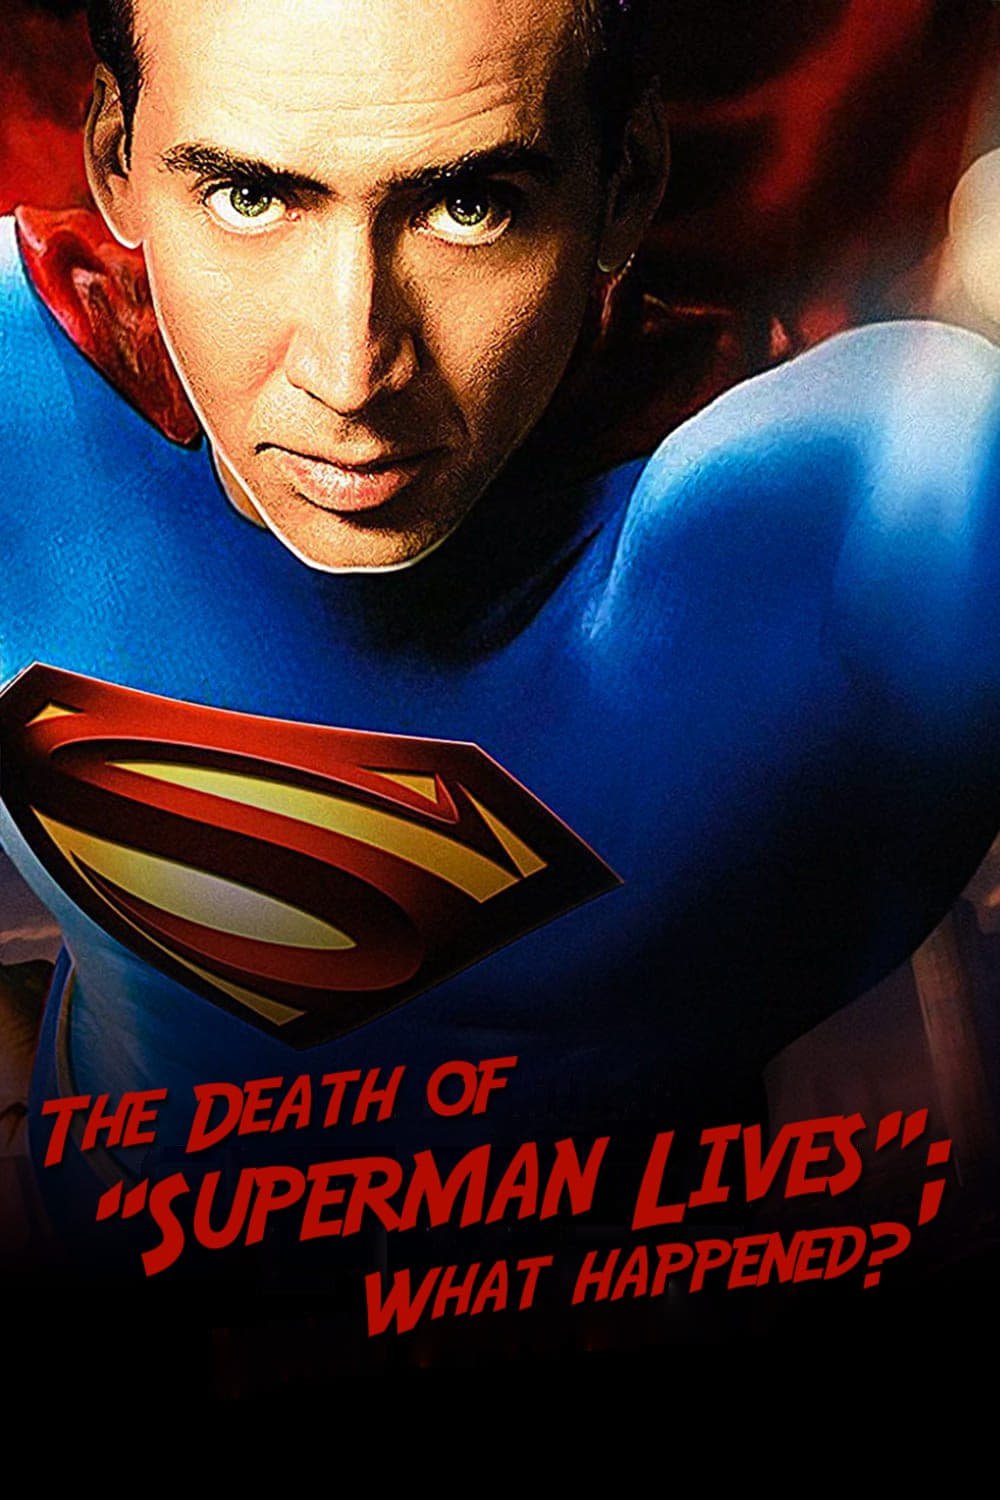 The Death of "Superman Lives": What Happened? (2015)